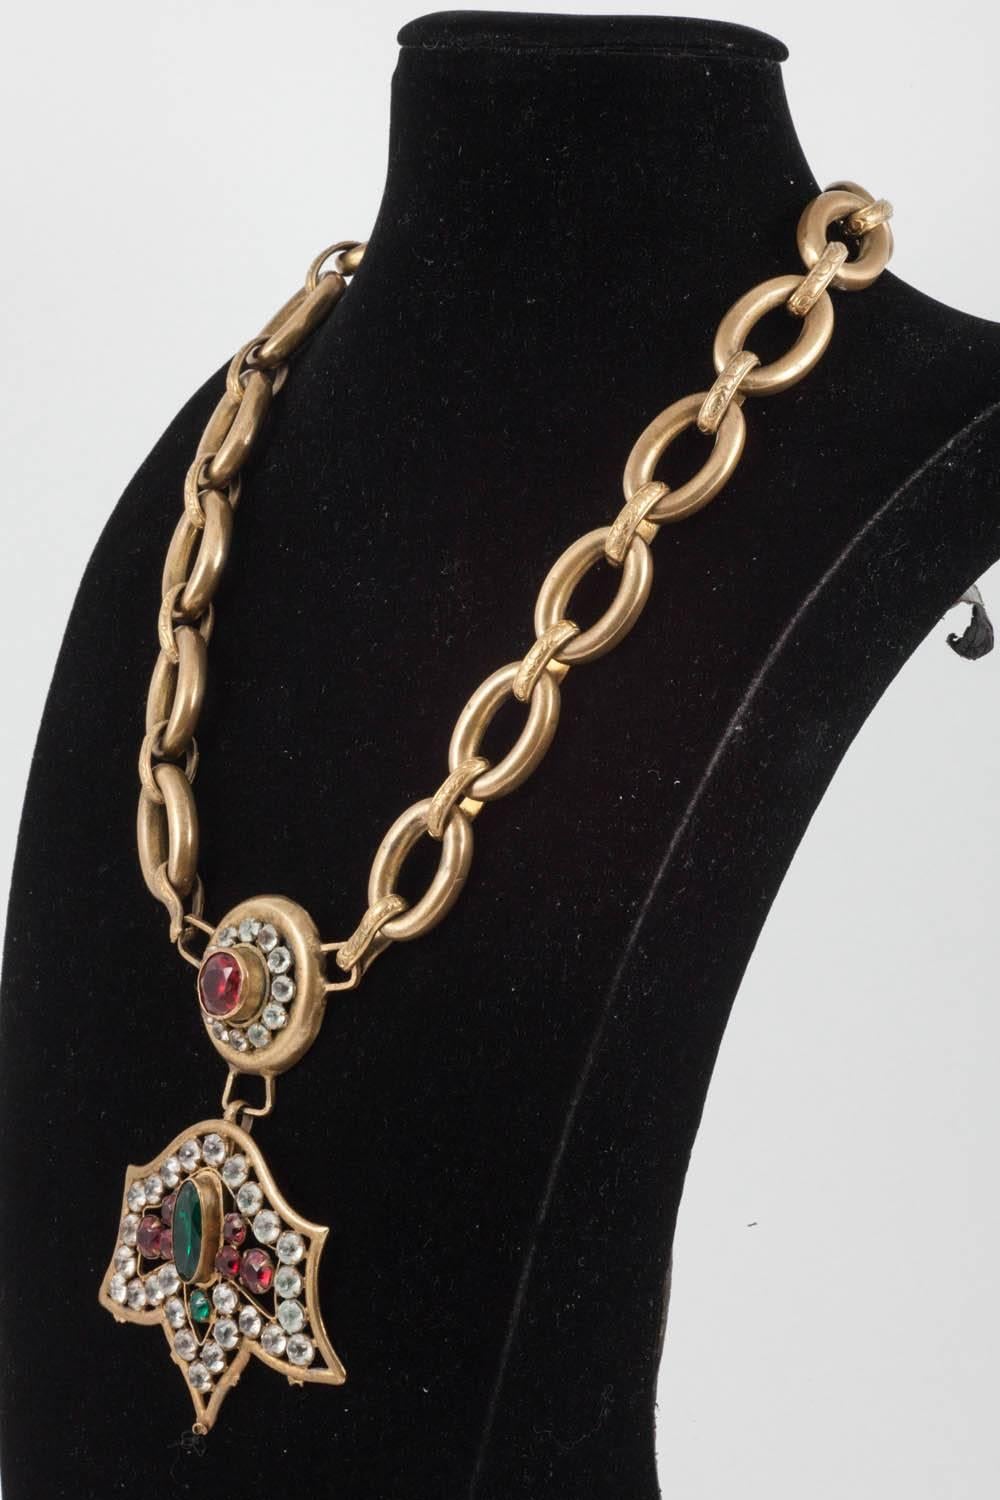 Belle Époque  Late 19th century brass and glass theatrical necklace, France.